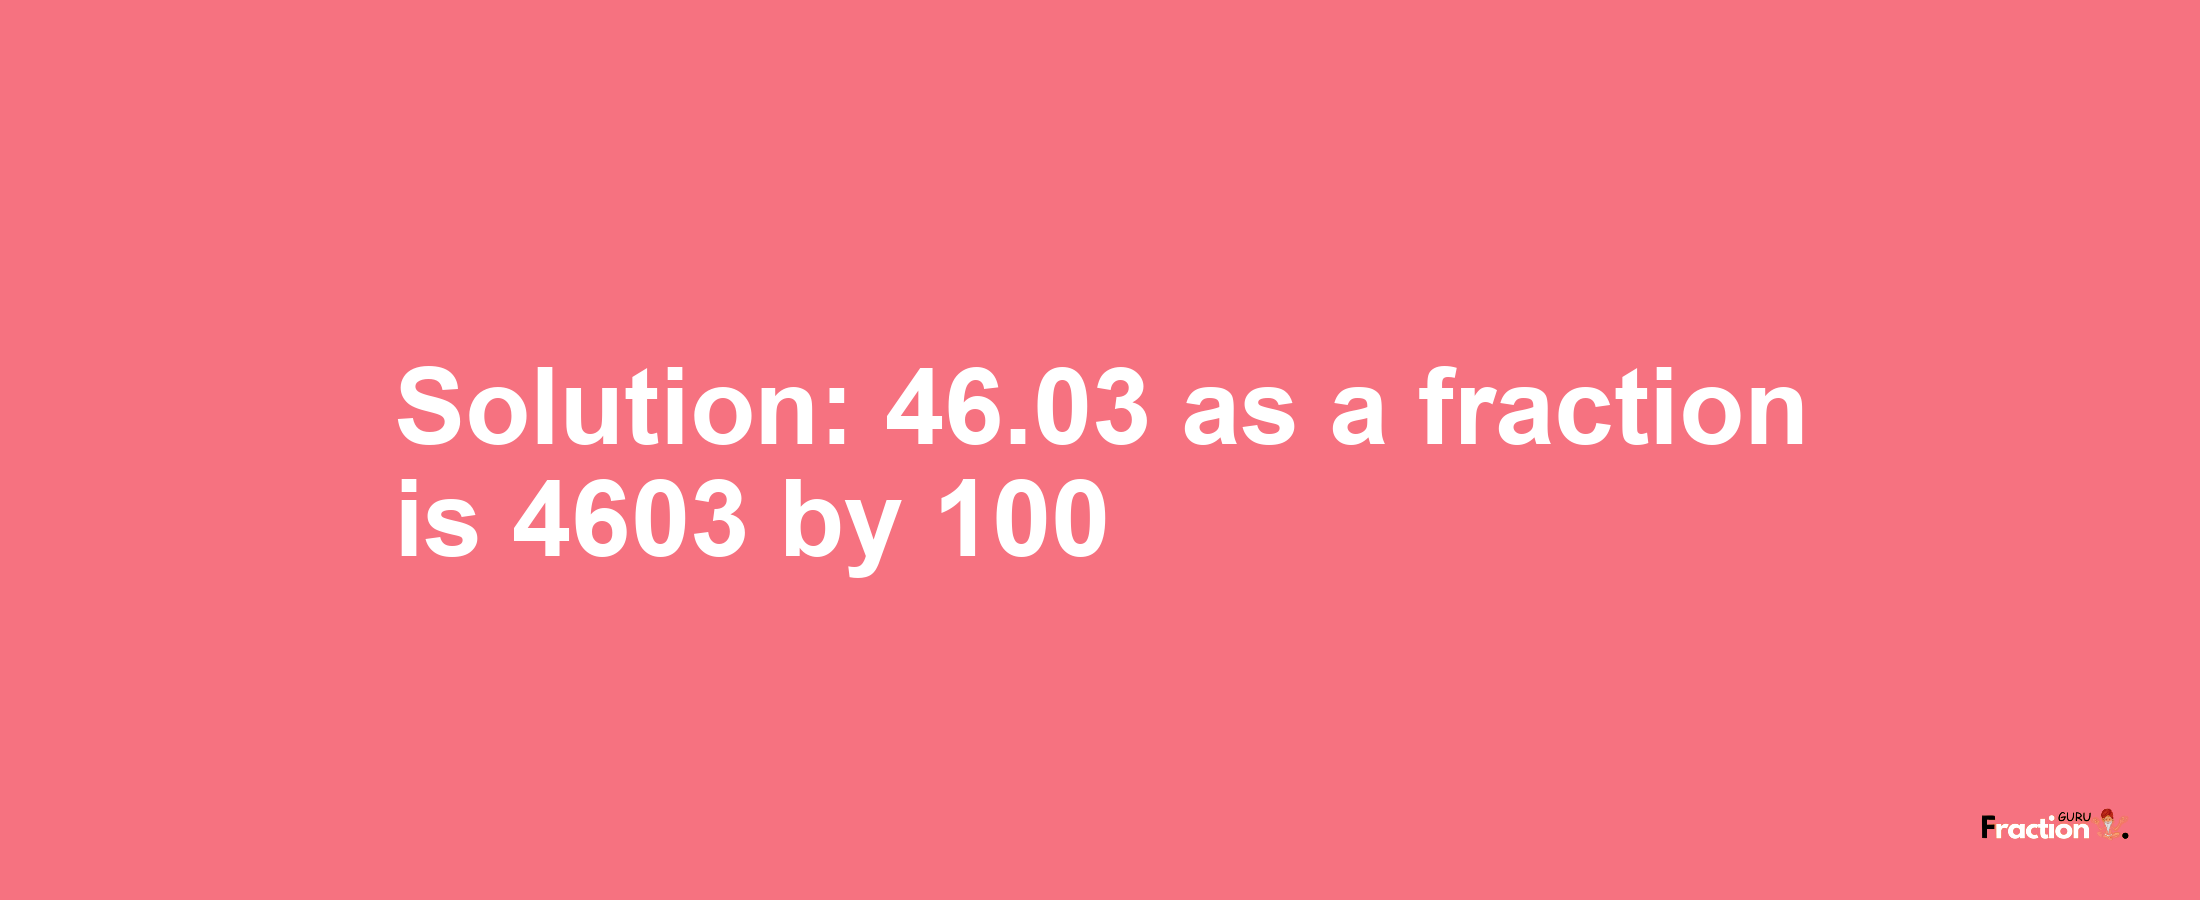 Solution:46.03 as a fraction is 4603/100